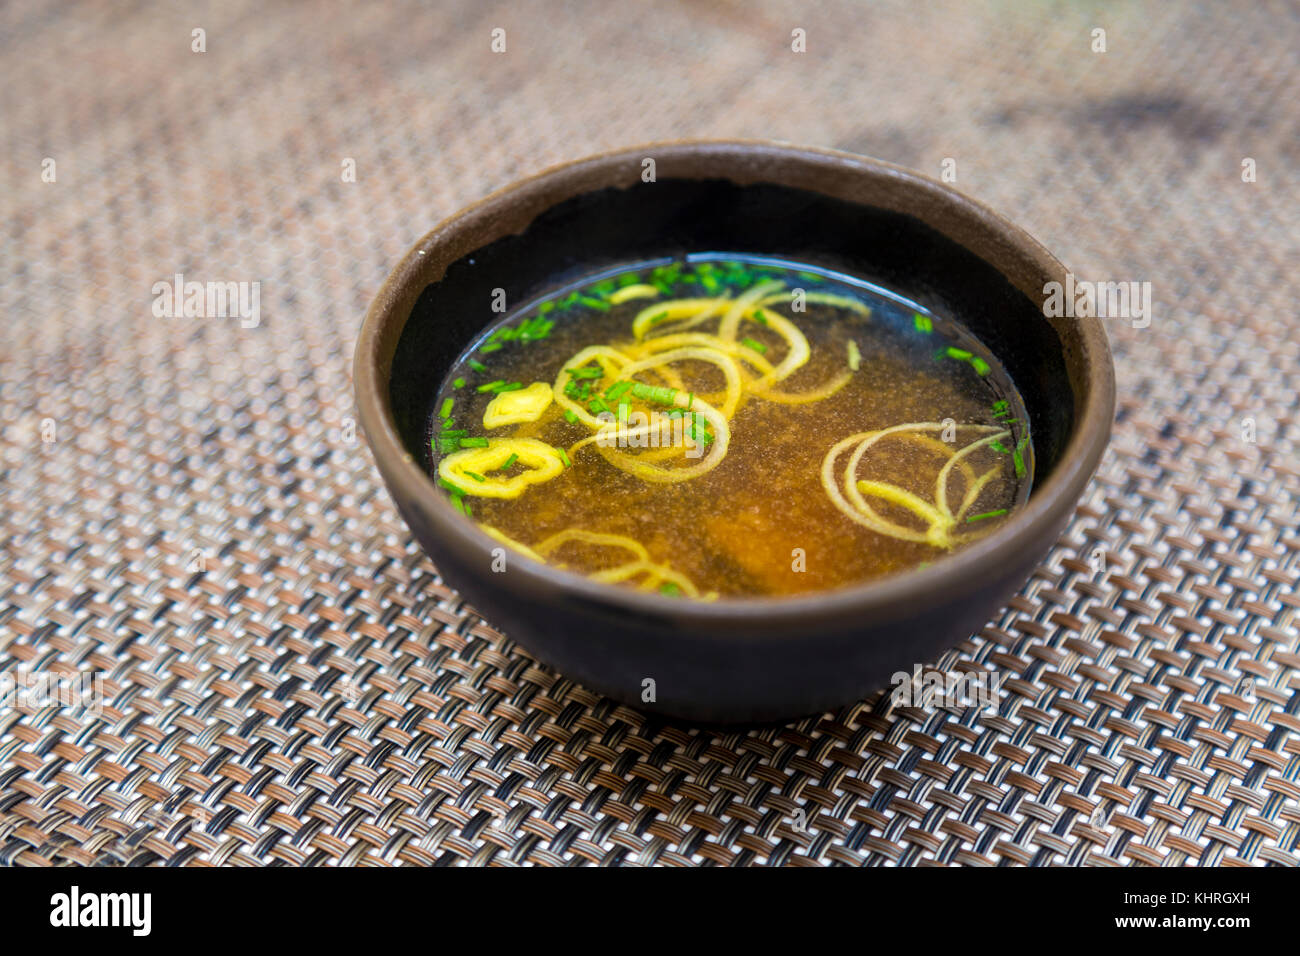 Miso soup in a brown ceramic bowl served on a table Stock Photo